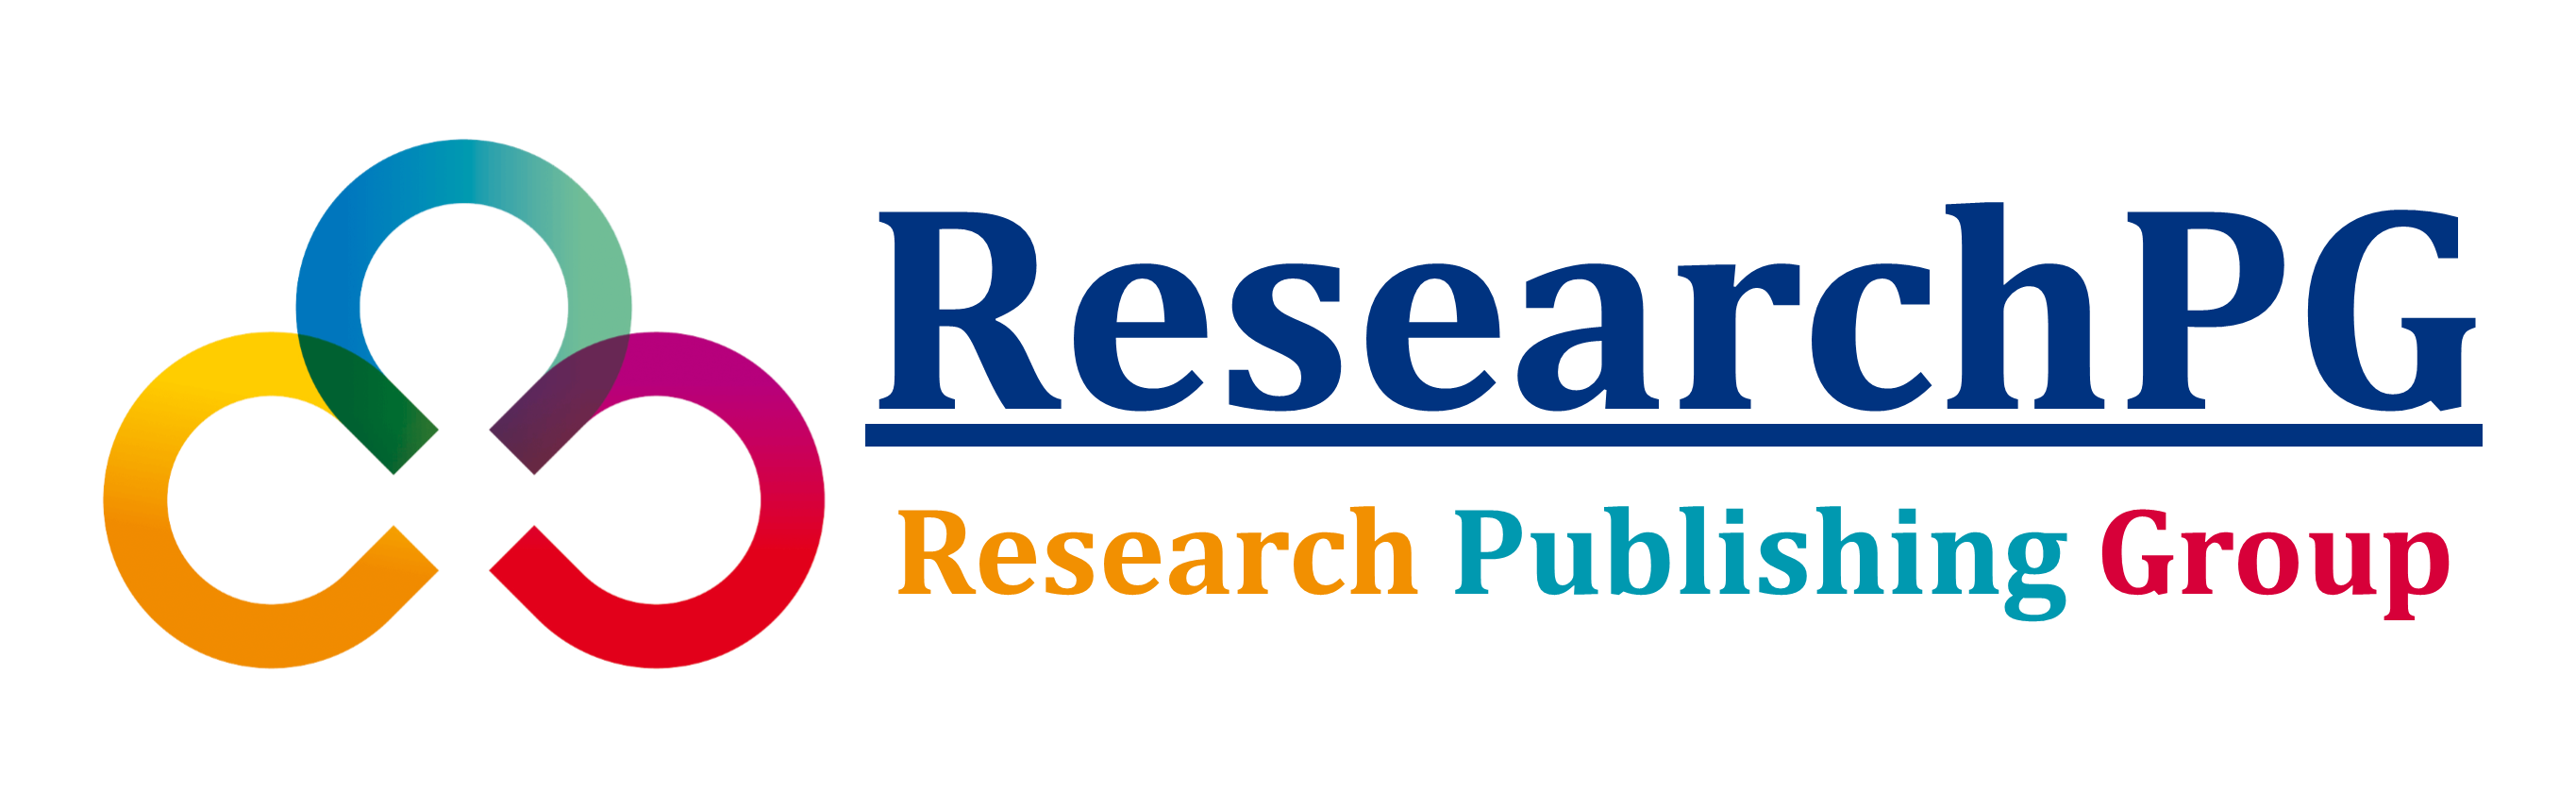 academic research publishing group